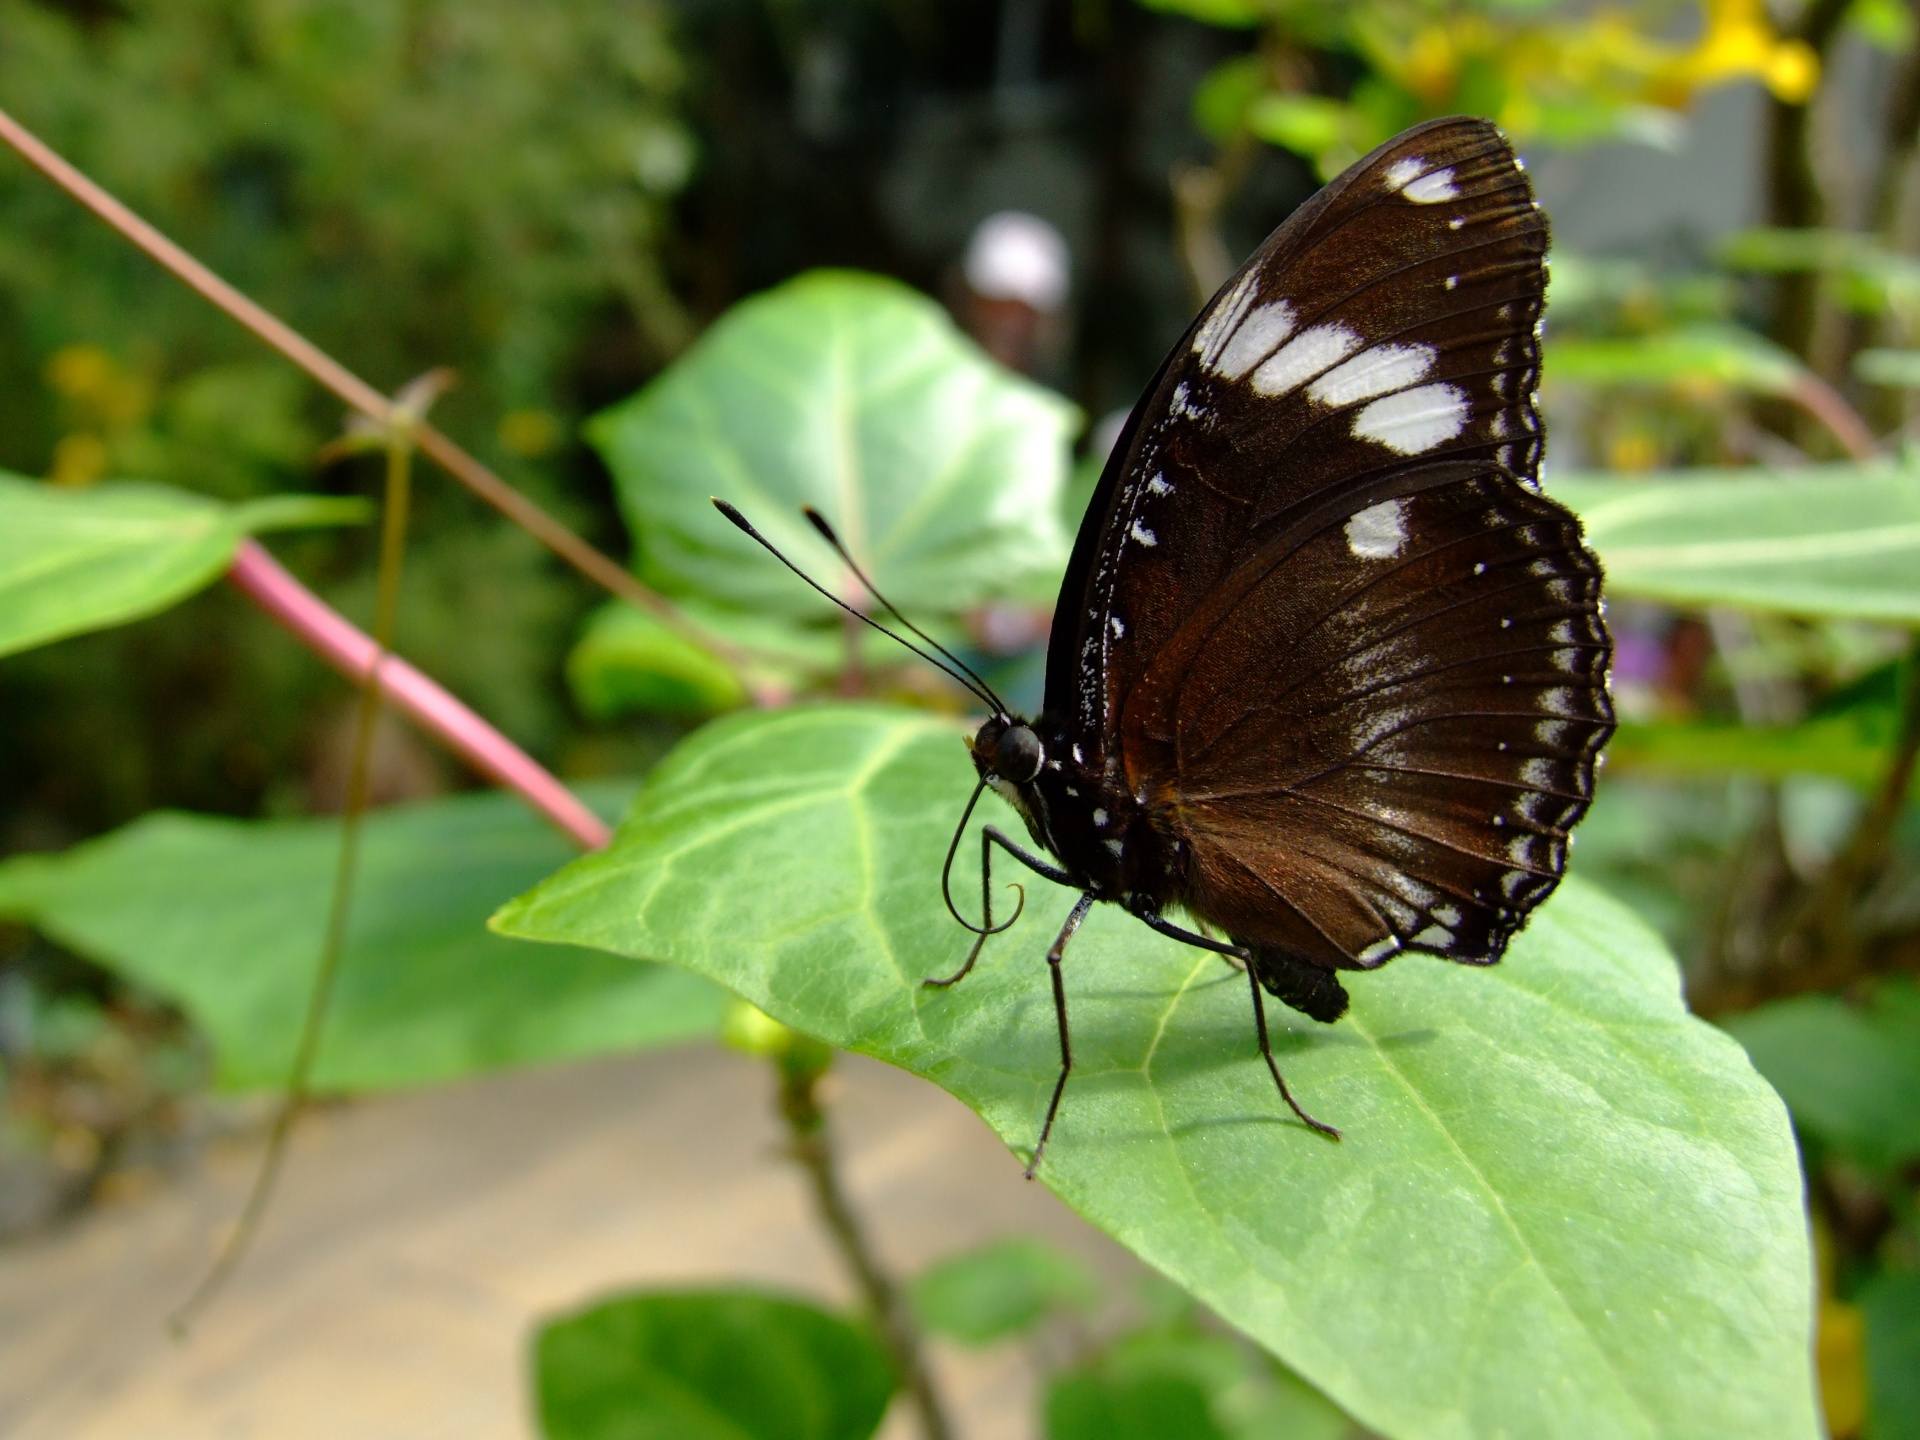 Close-up shot of large exotic butterfly sitting on a leaf